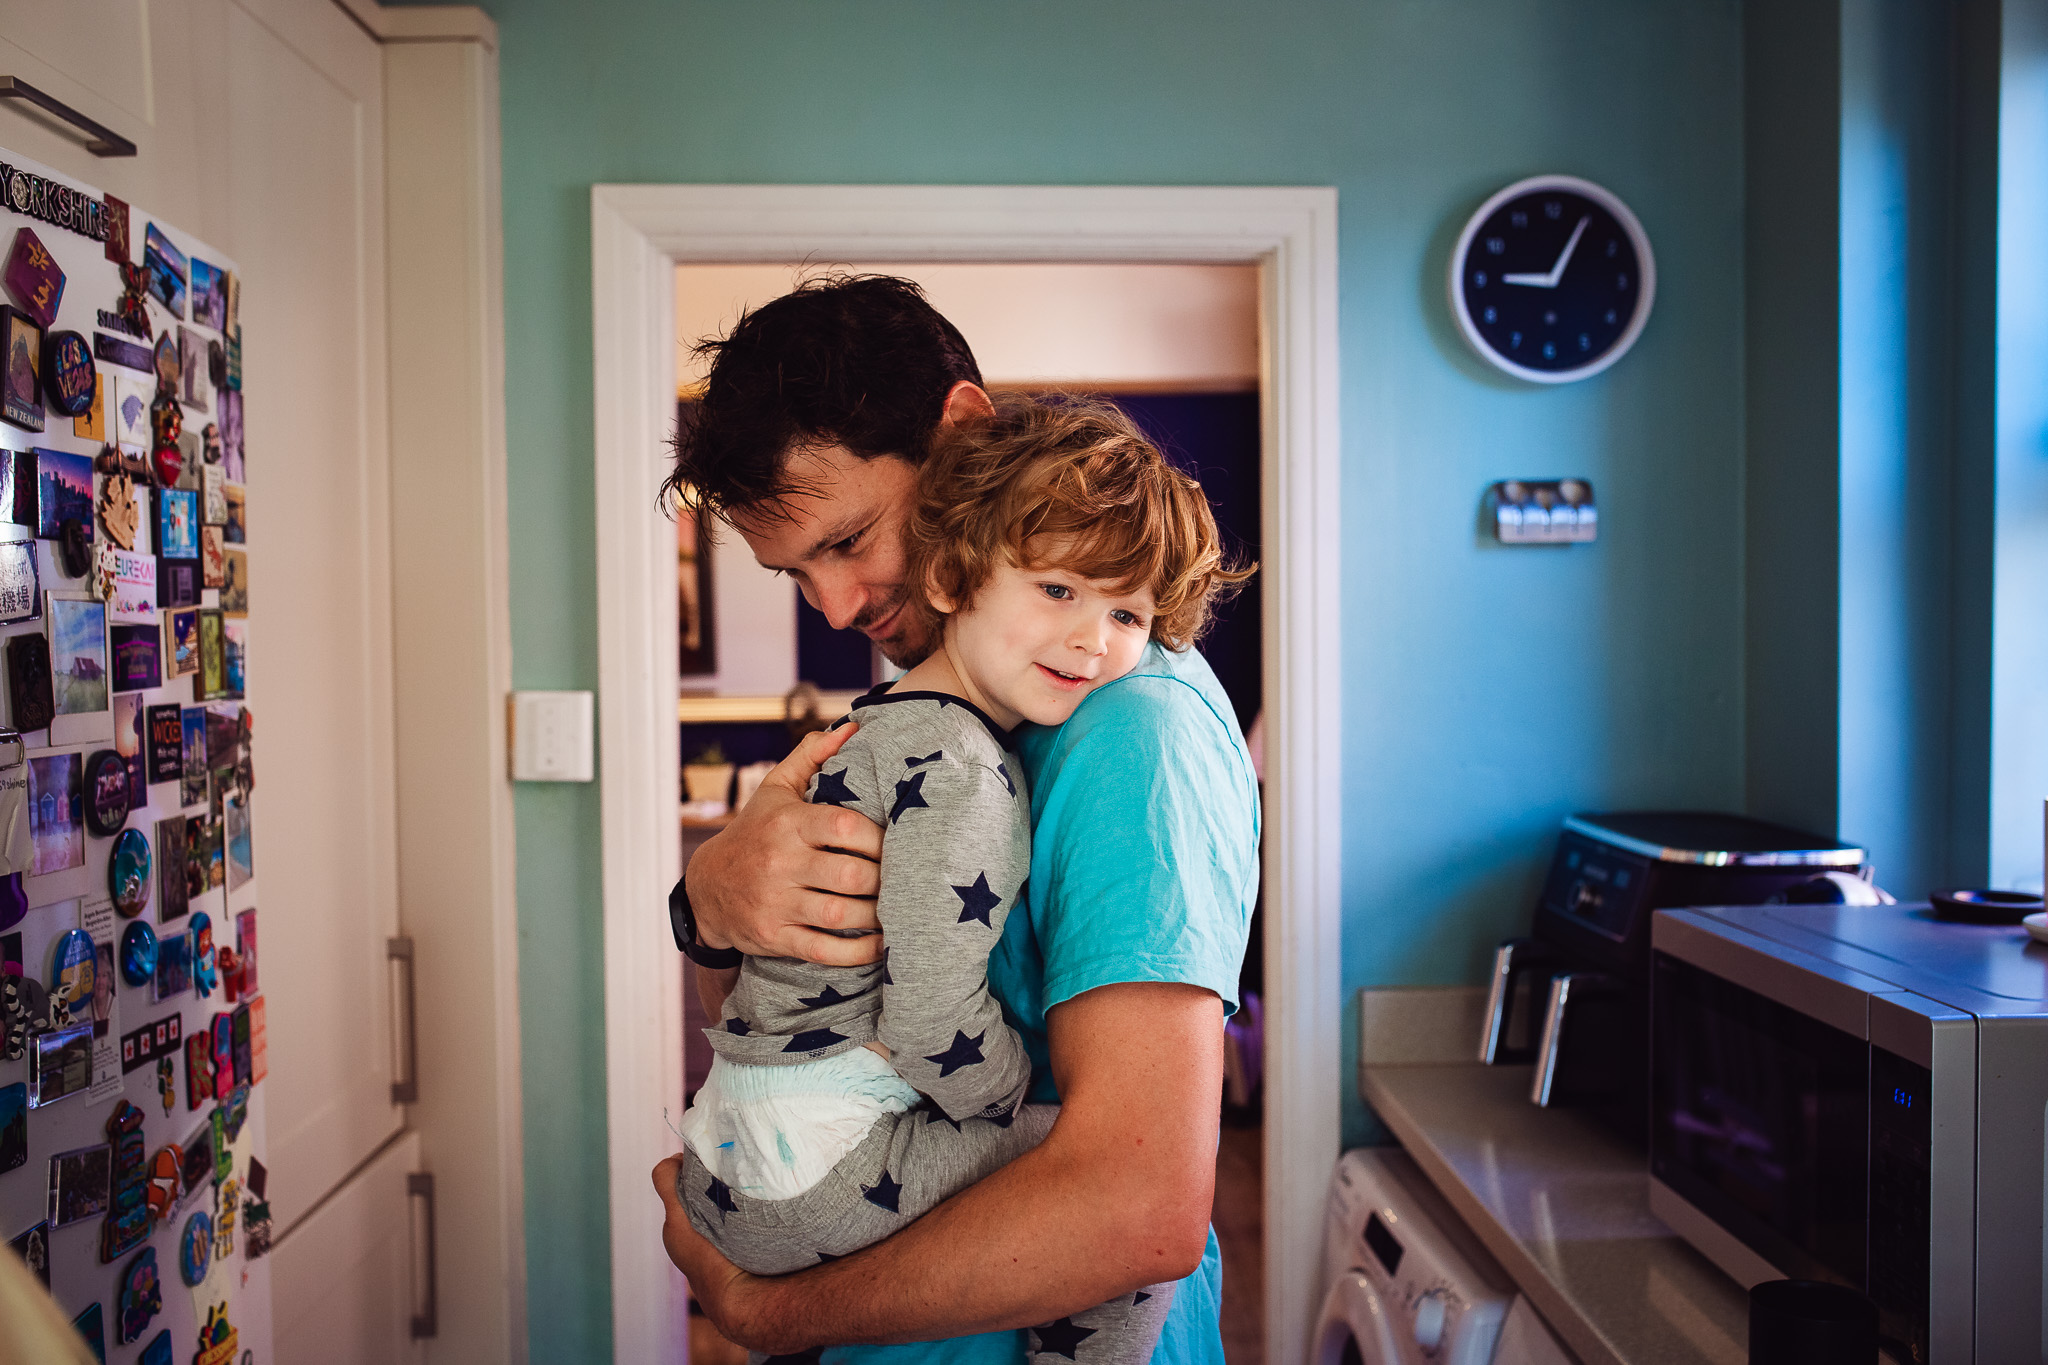 Dad and his young son cuddle in the kitchen during a family photo session.